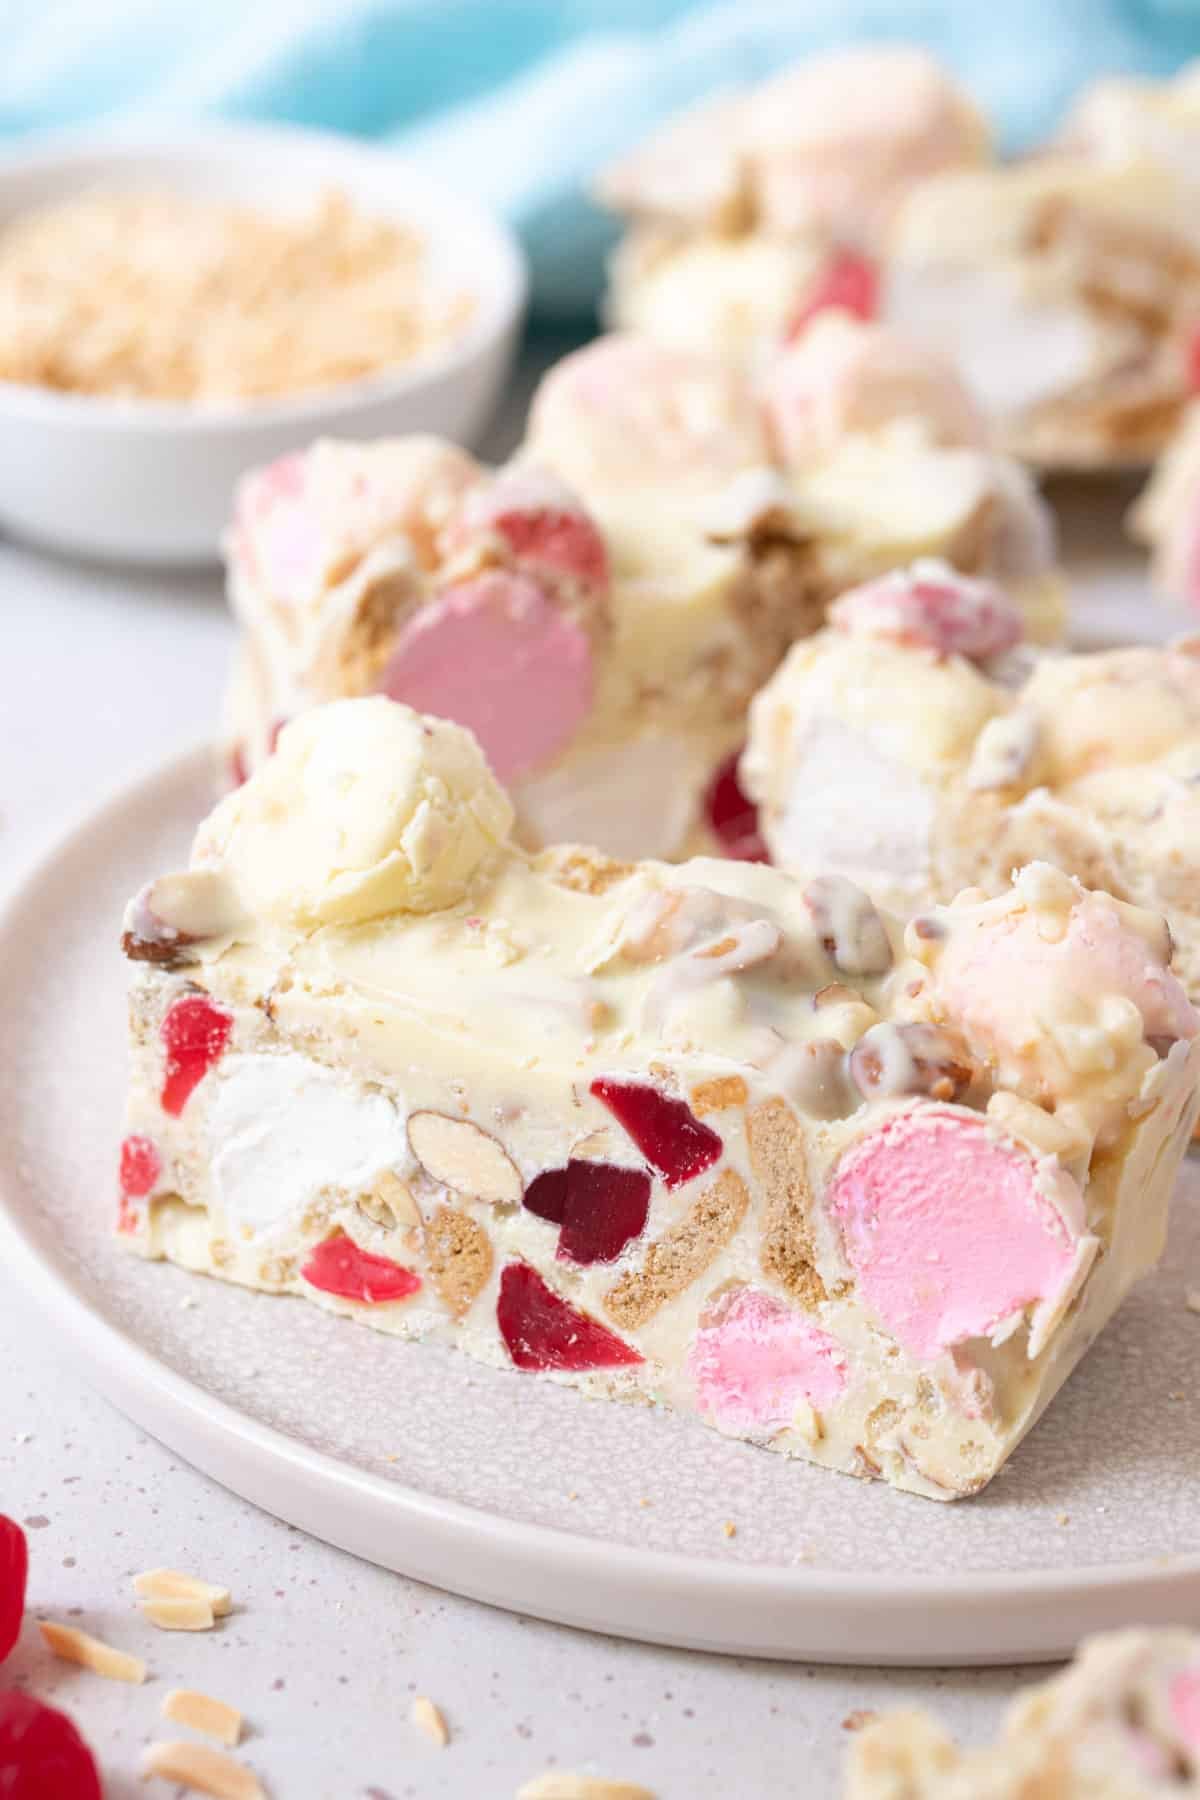 a plate of white chocolate rocky road cut into pieces, showing the marshmallow and lollies centre..